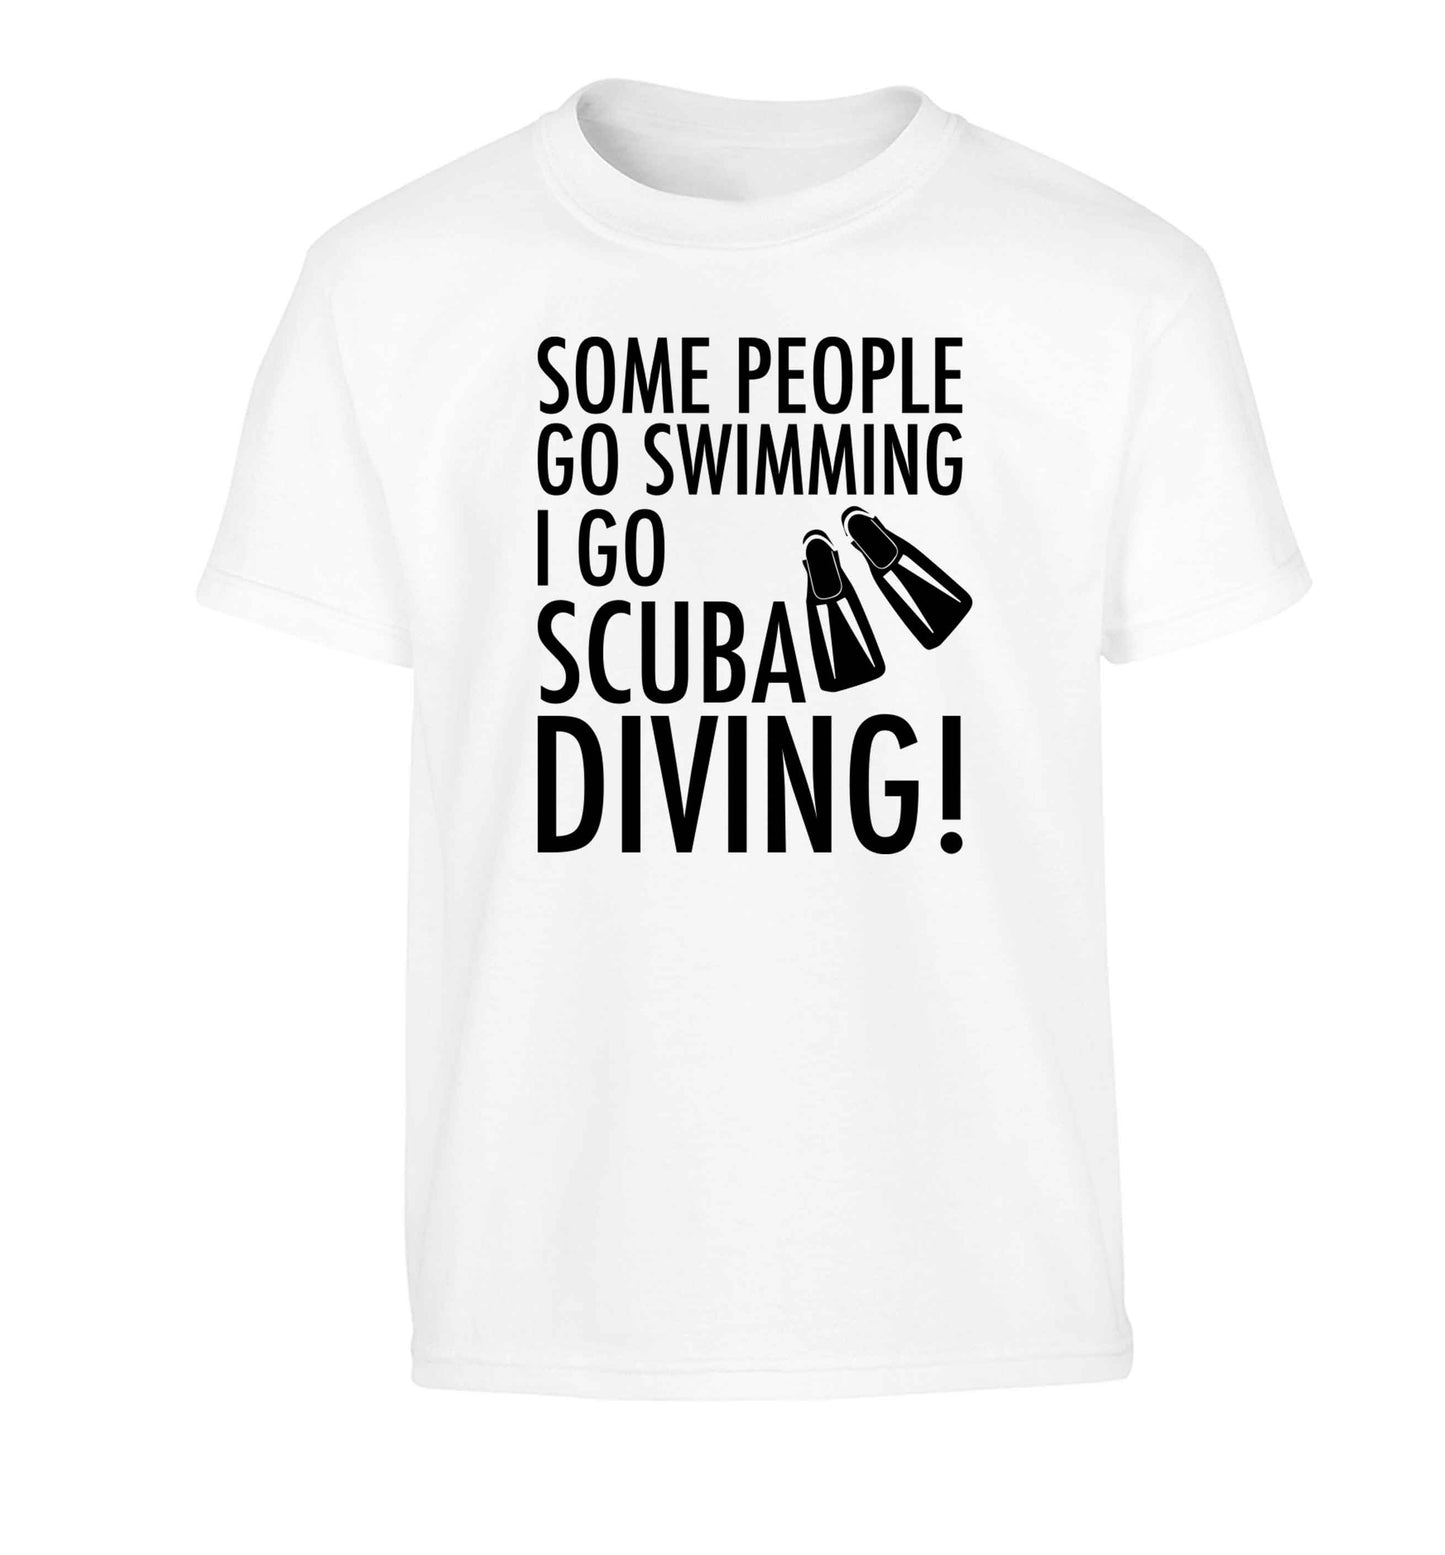 Some people go swimming I go scuba diving! Children's white Tshirt 12-13 Years